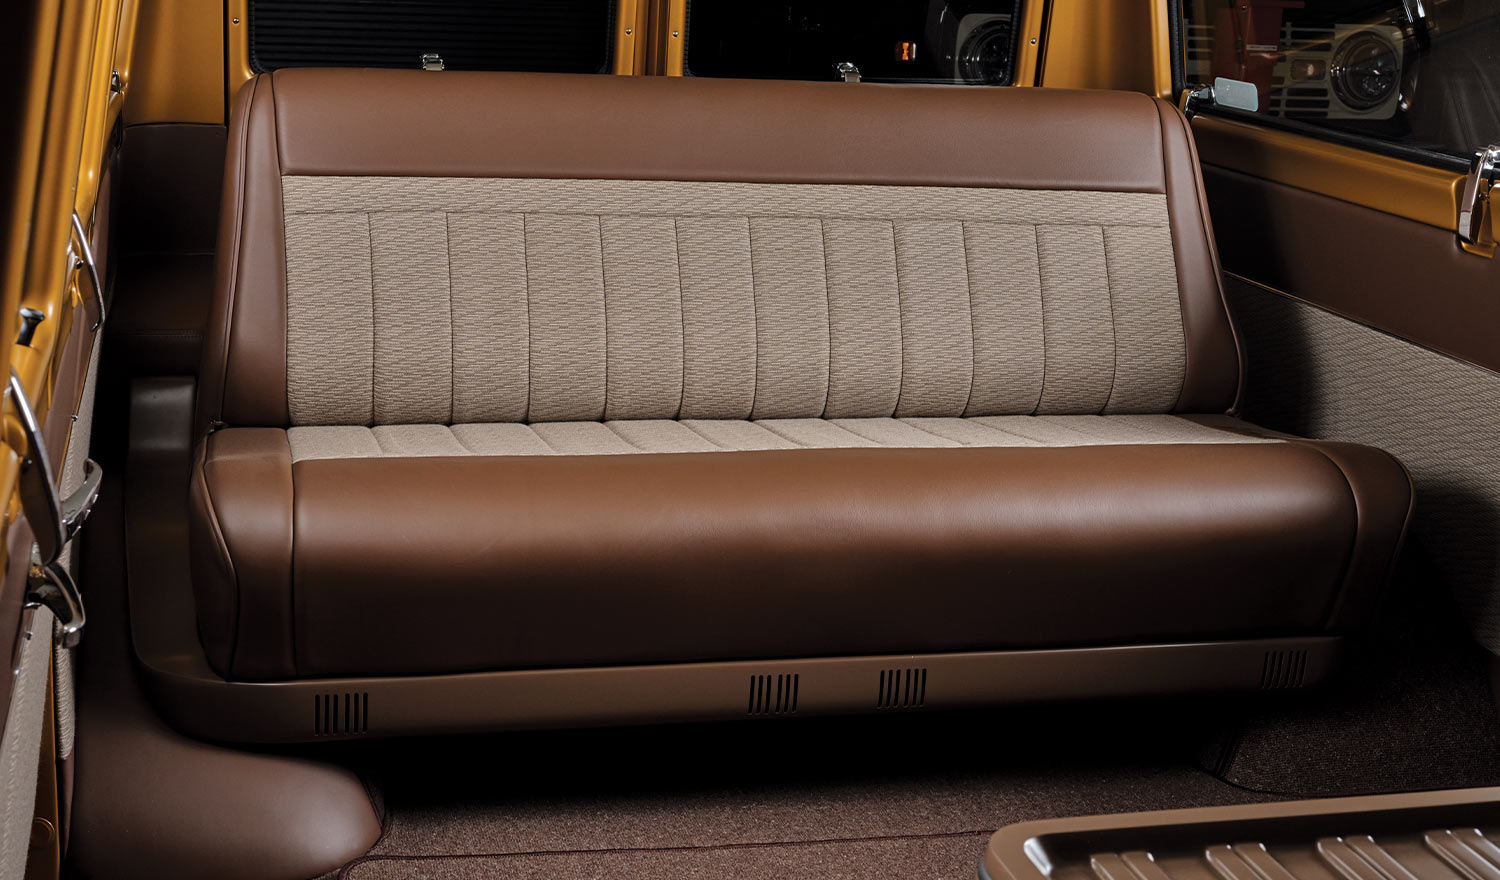 the '69 Dodge A108's rear seat bench